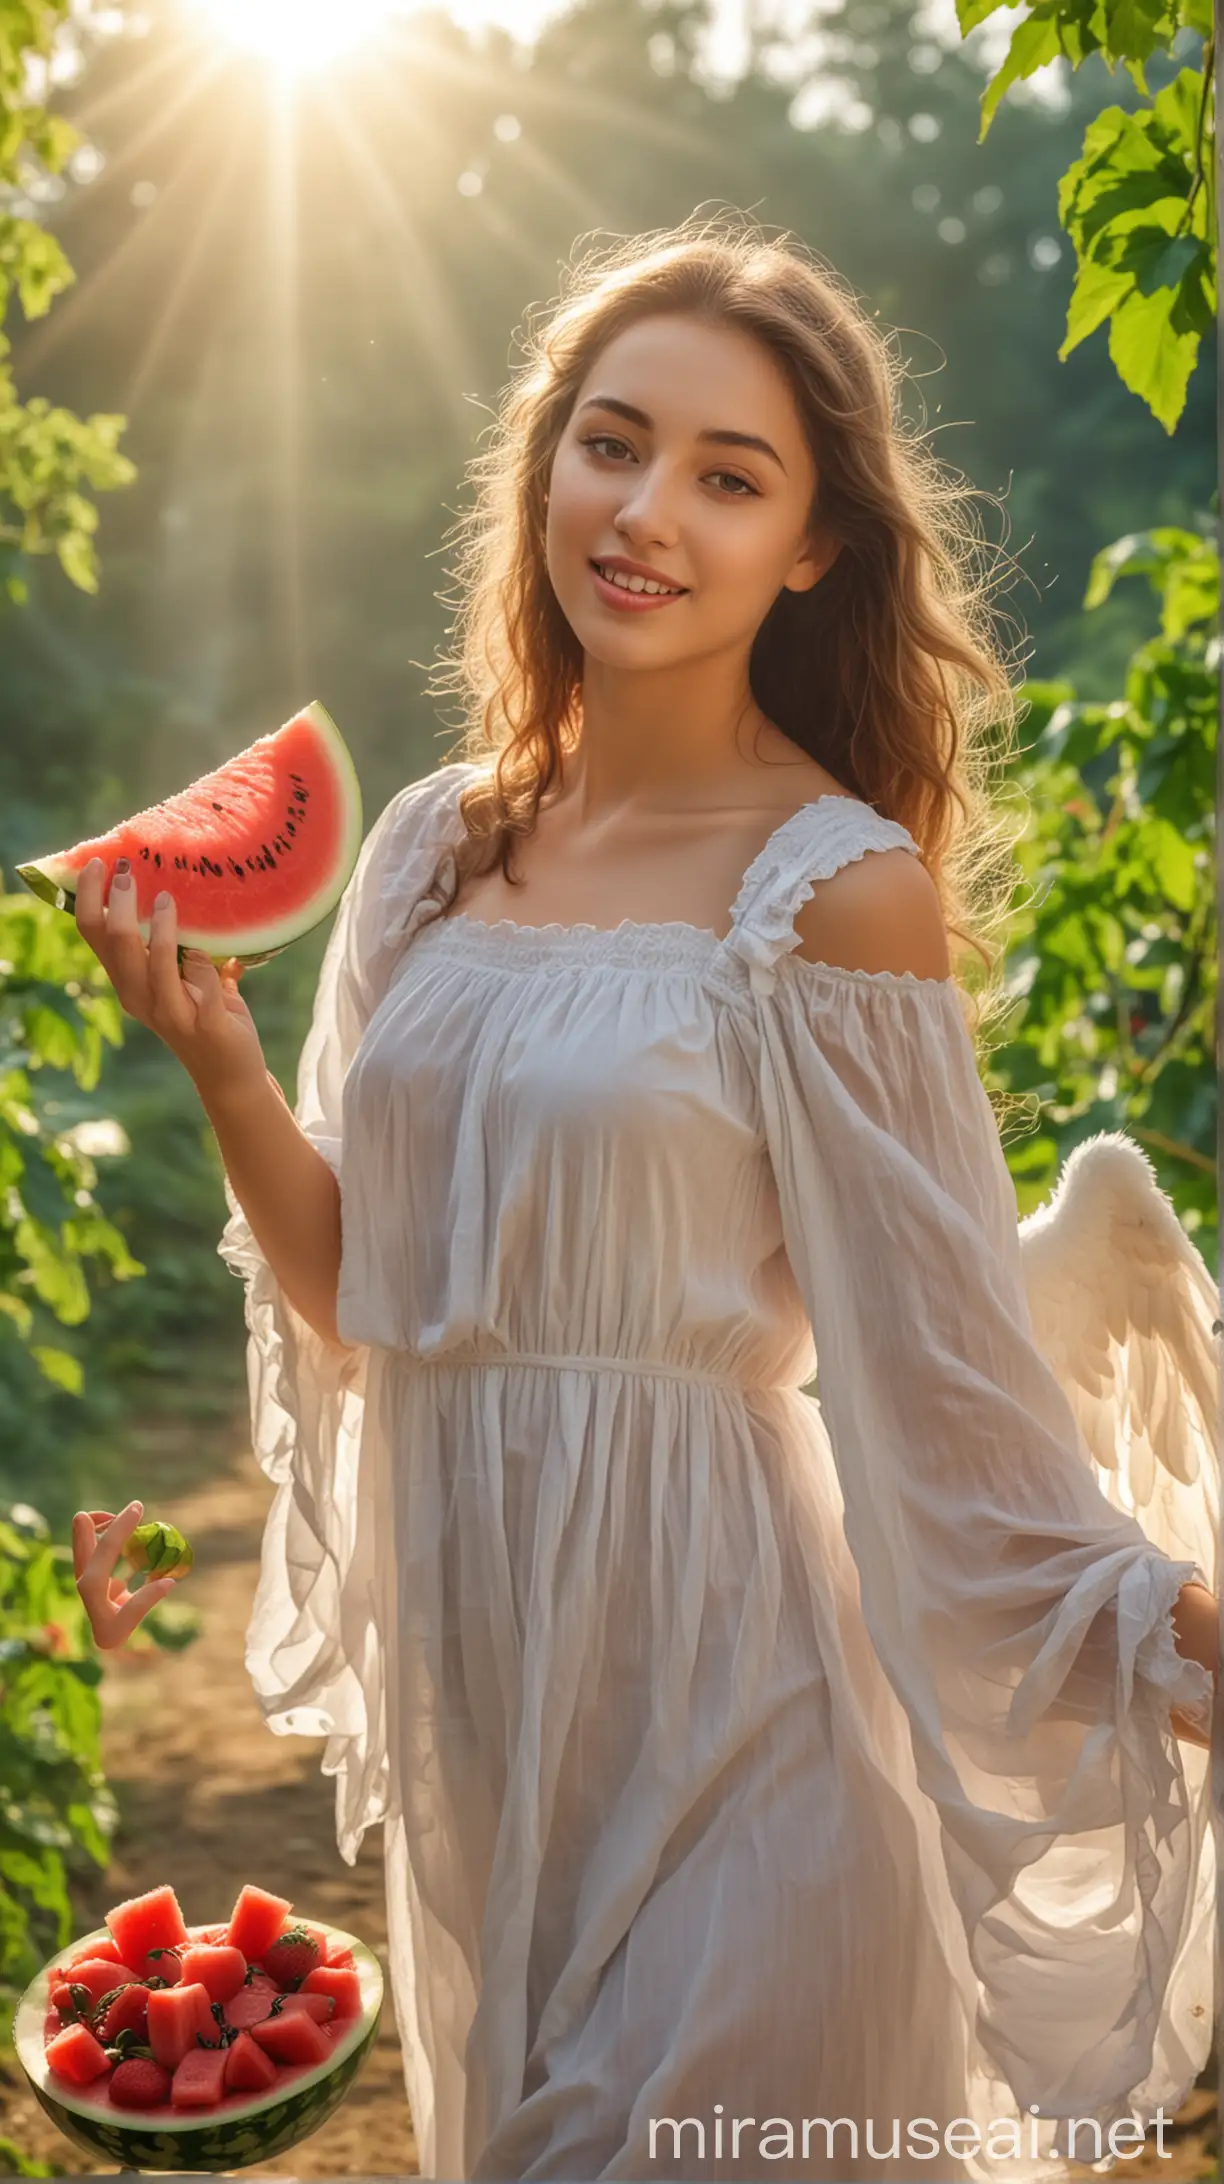 Angel Women Holding Watermelon in Sunlit Natural Setting